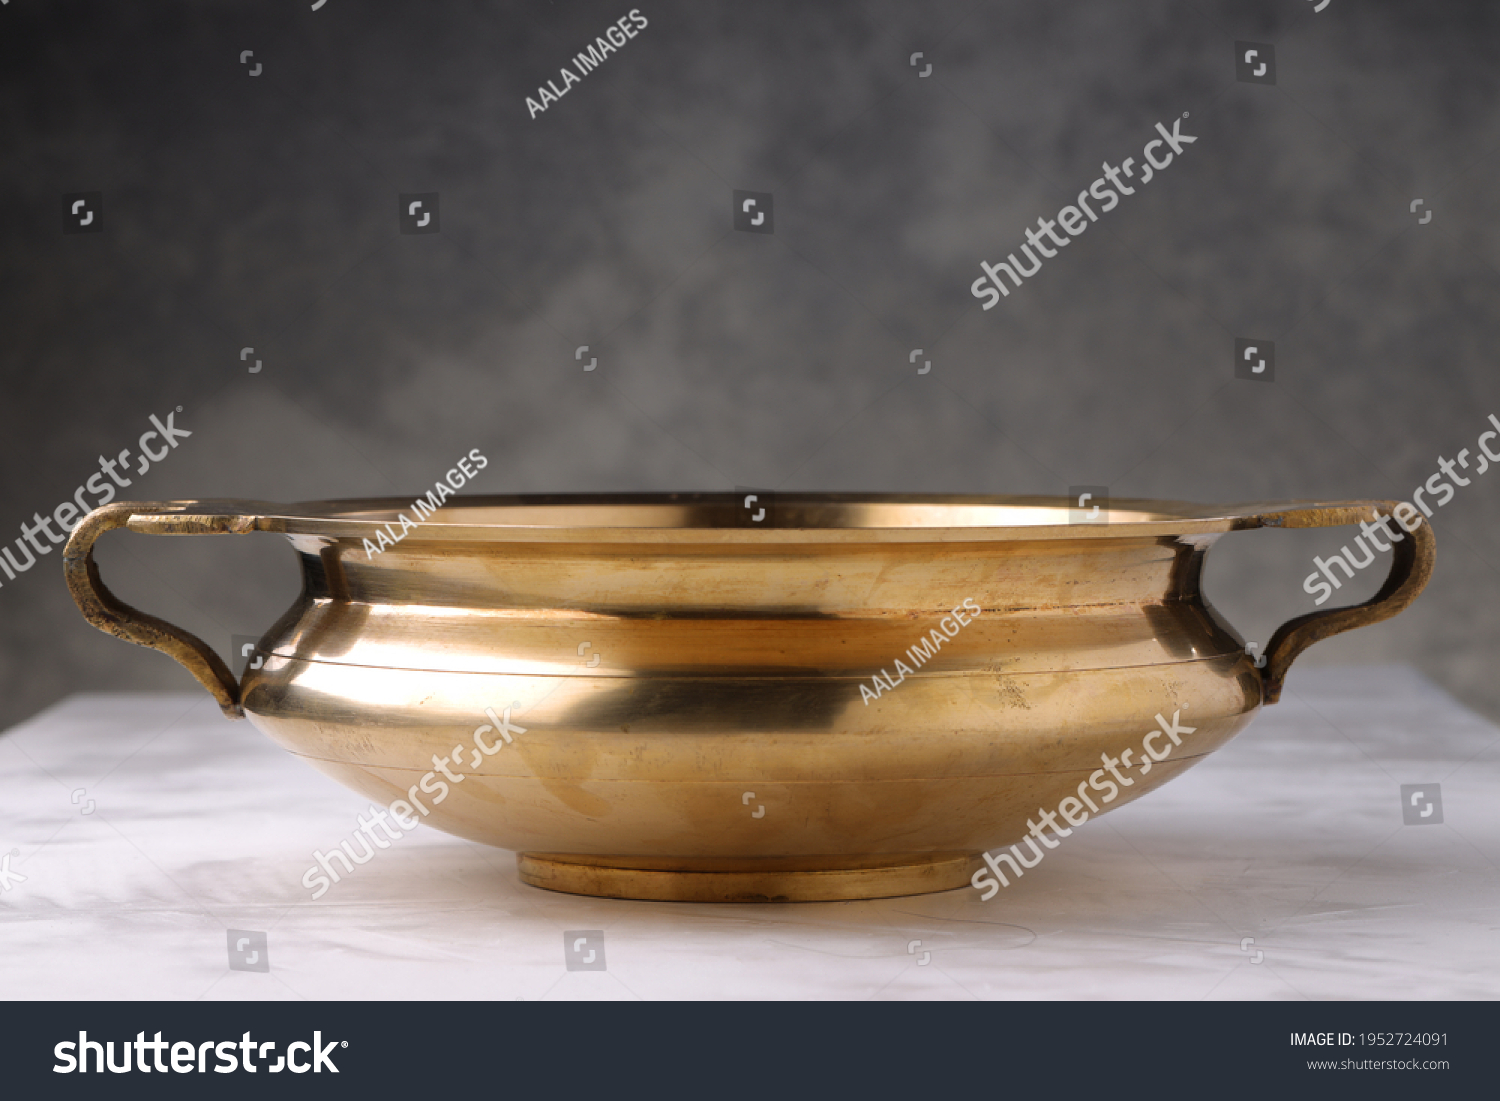 Urule or Brass vessel,an empty traditional  south Indian cooking vessel which is very shiny placed on grey textured background. #1952724091